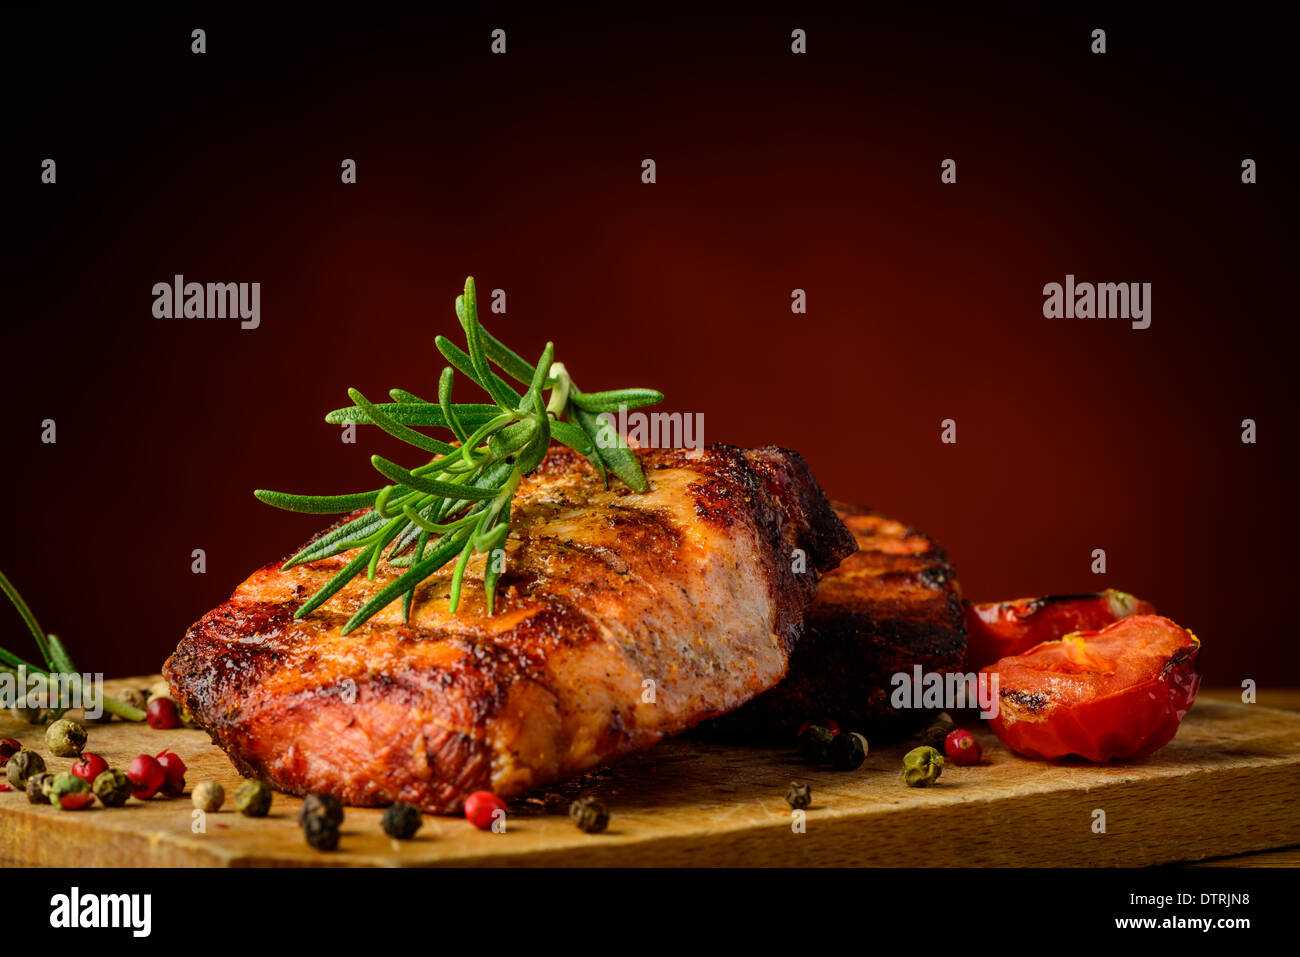 still life with grilled meat and rosemary herb Stock Photo